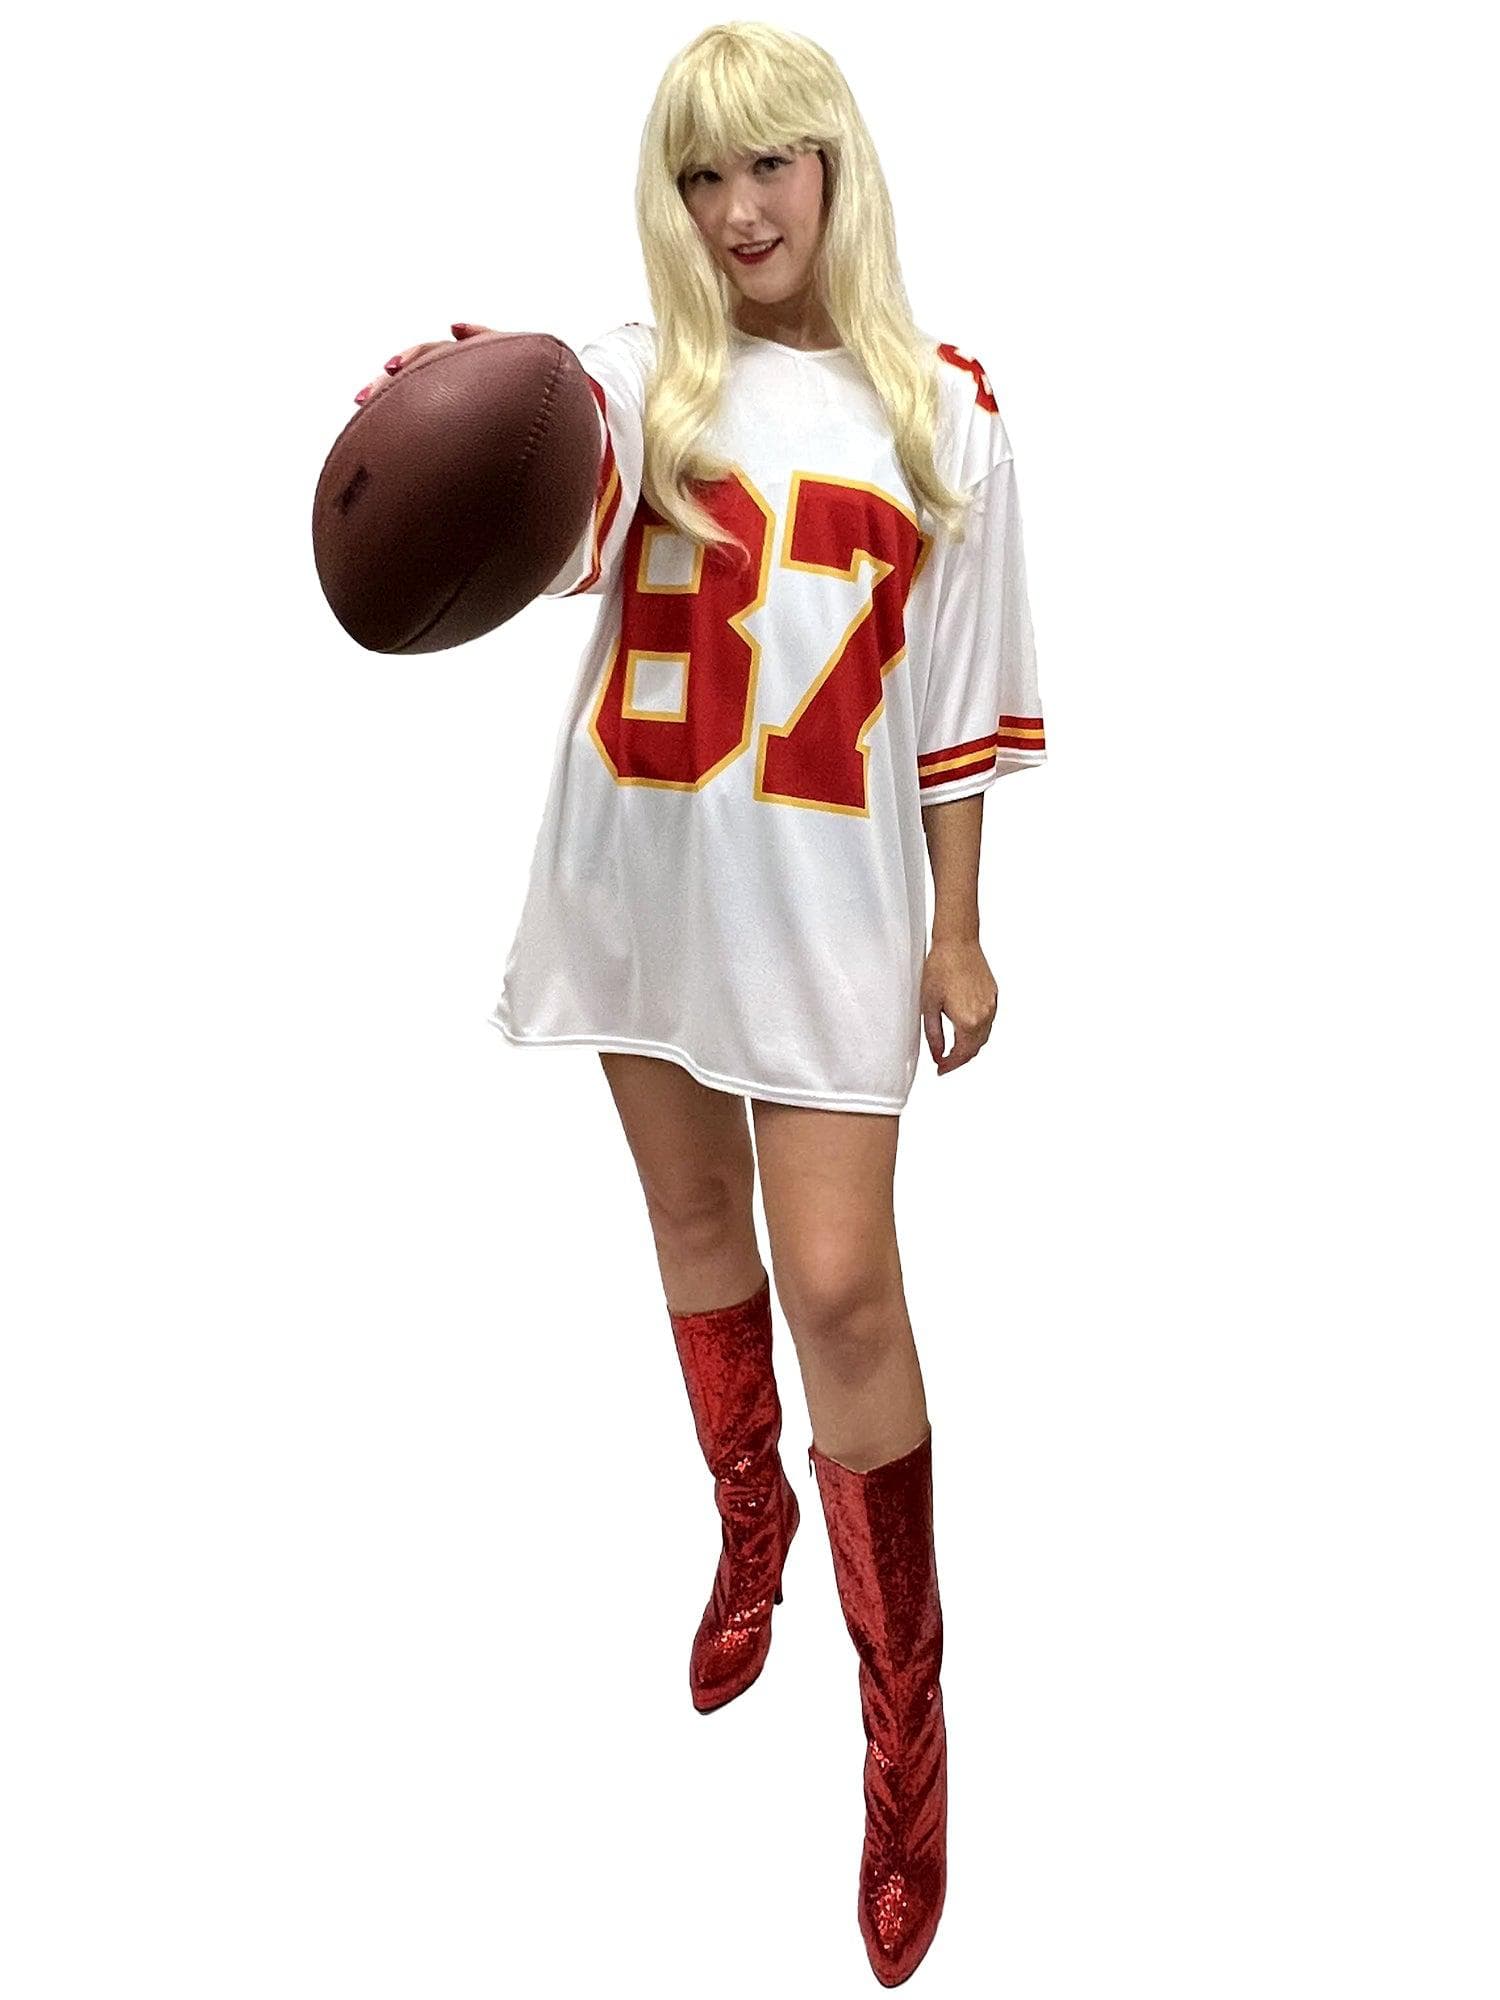 Football Era White and Red Number 87 Jersey - costumes.com